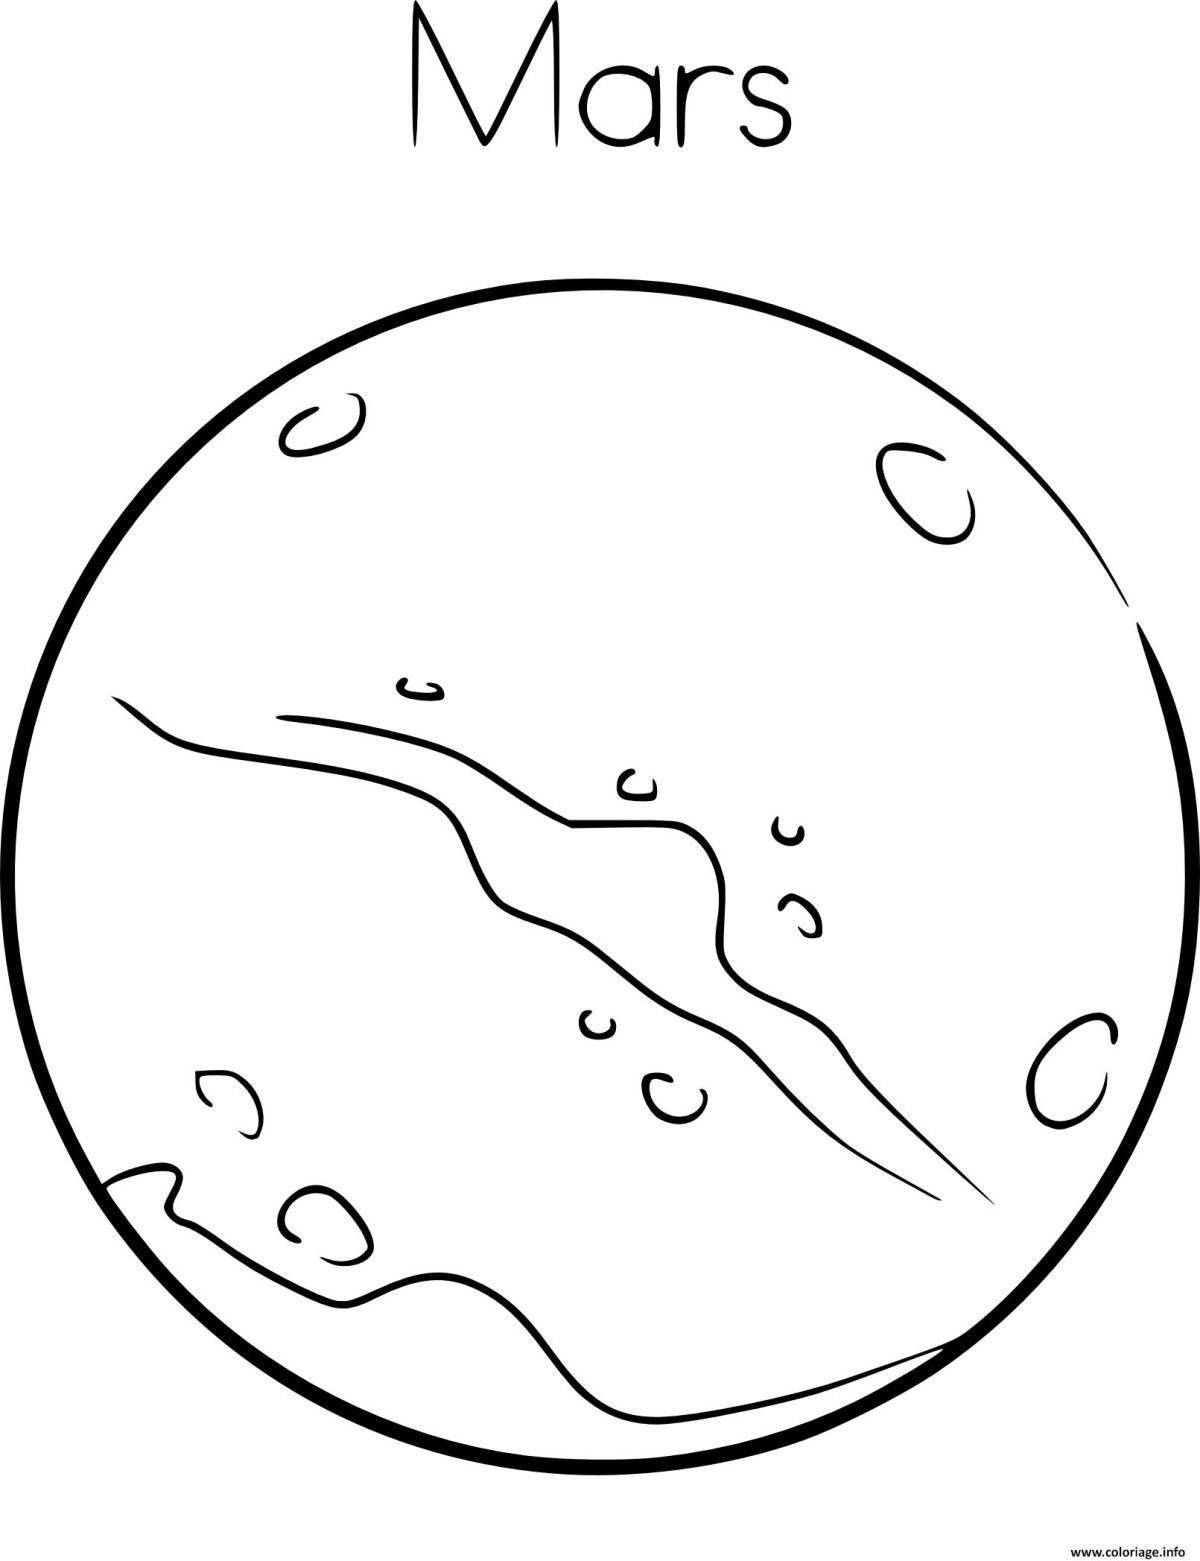 Coloring page amazing planet mercury